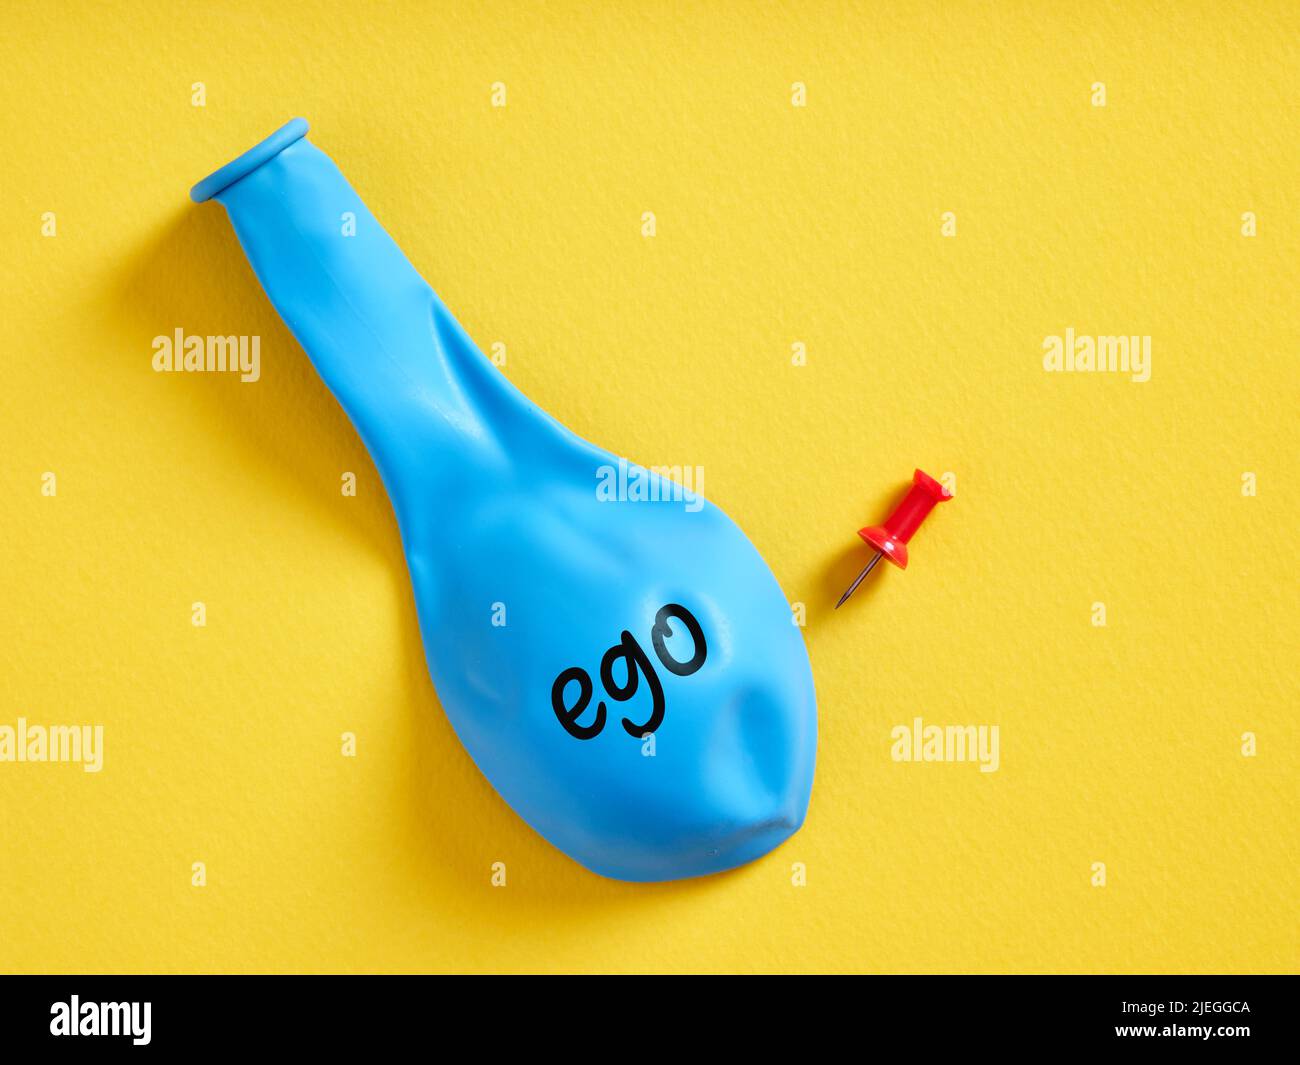 https://c8.alamy.com/comp/2JEGGCA/deflated-blue-balloon-with-the-word-ego-and-a-pin-selfishness-or-regression-of-the-extreme-ego-concept-2JEGGCA.jpg